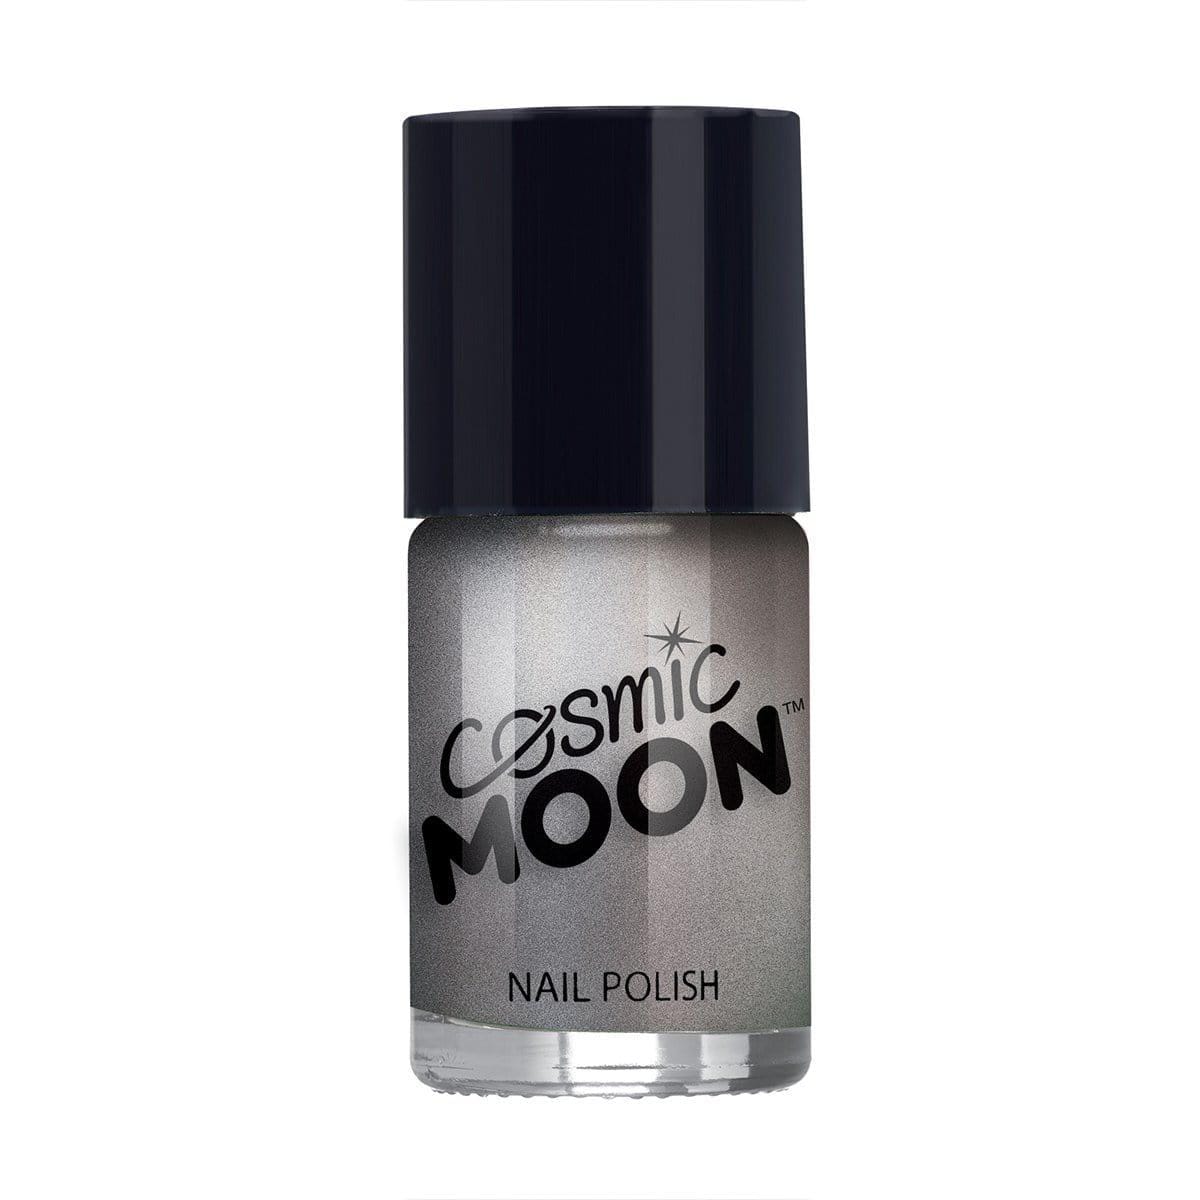 Buy Costume Accessories Moon silver metallic nail polish sold at Party Expert